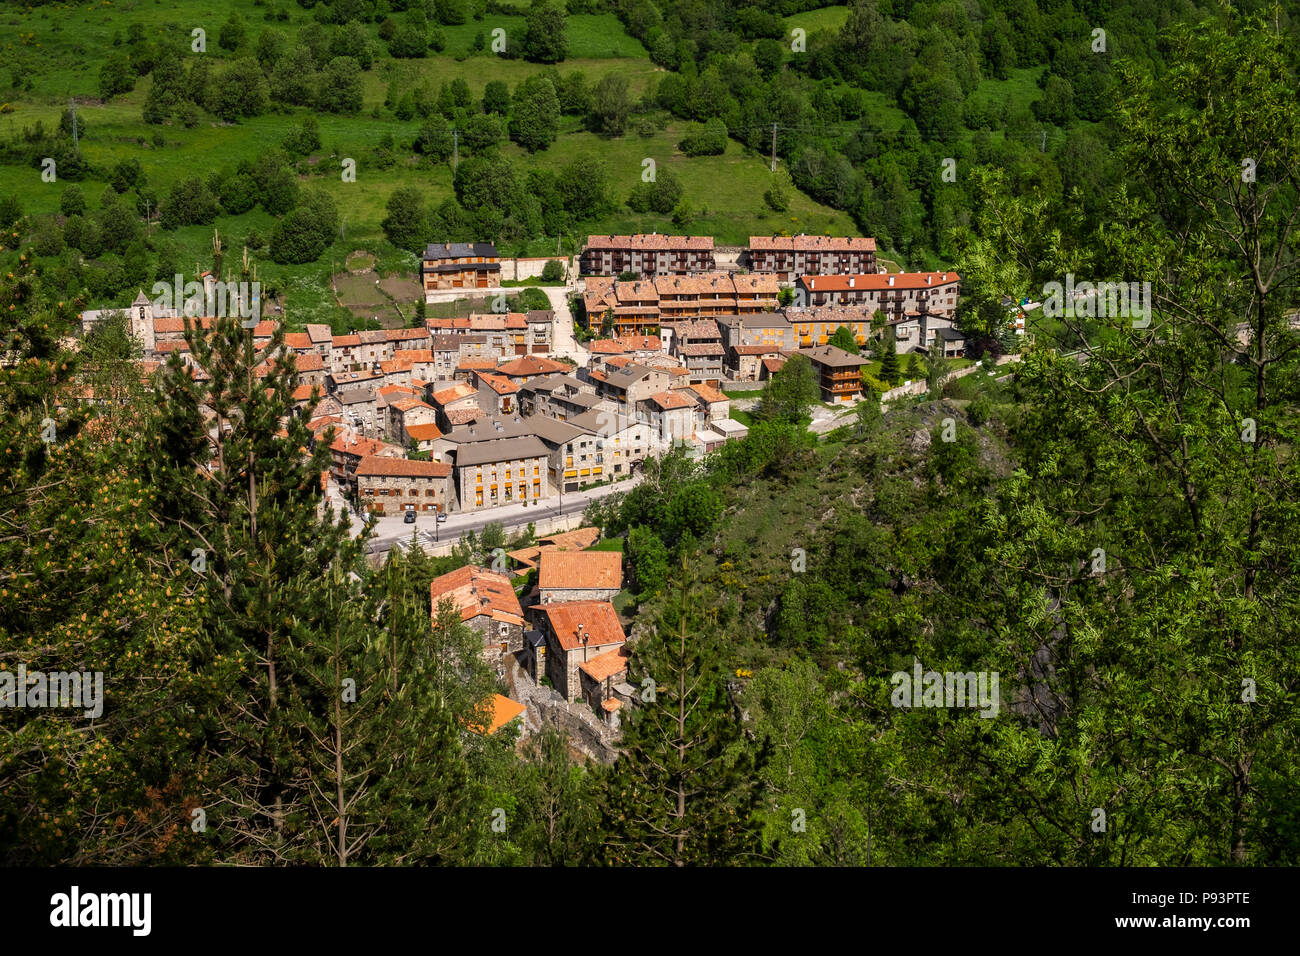 The red tiled roofs and granite buildings of the village of Setcases in the Pyrenees, Catalonia, Spain Stock Photo